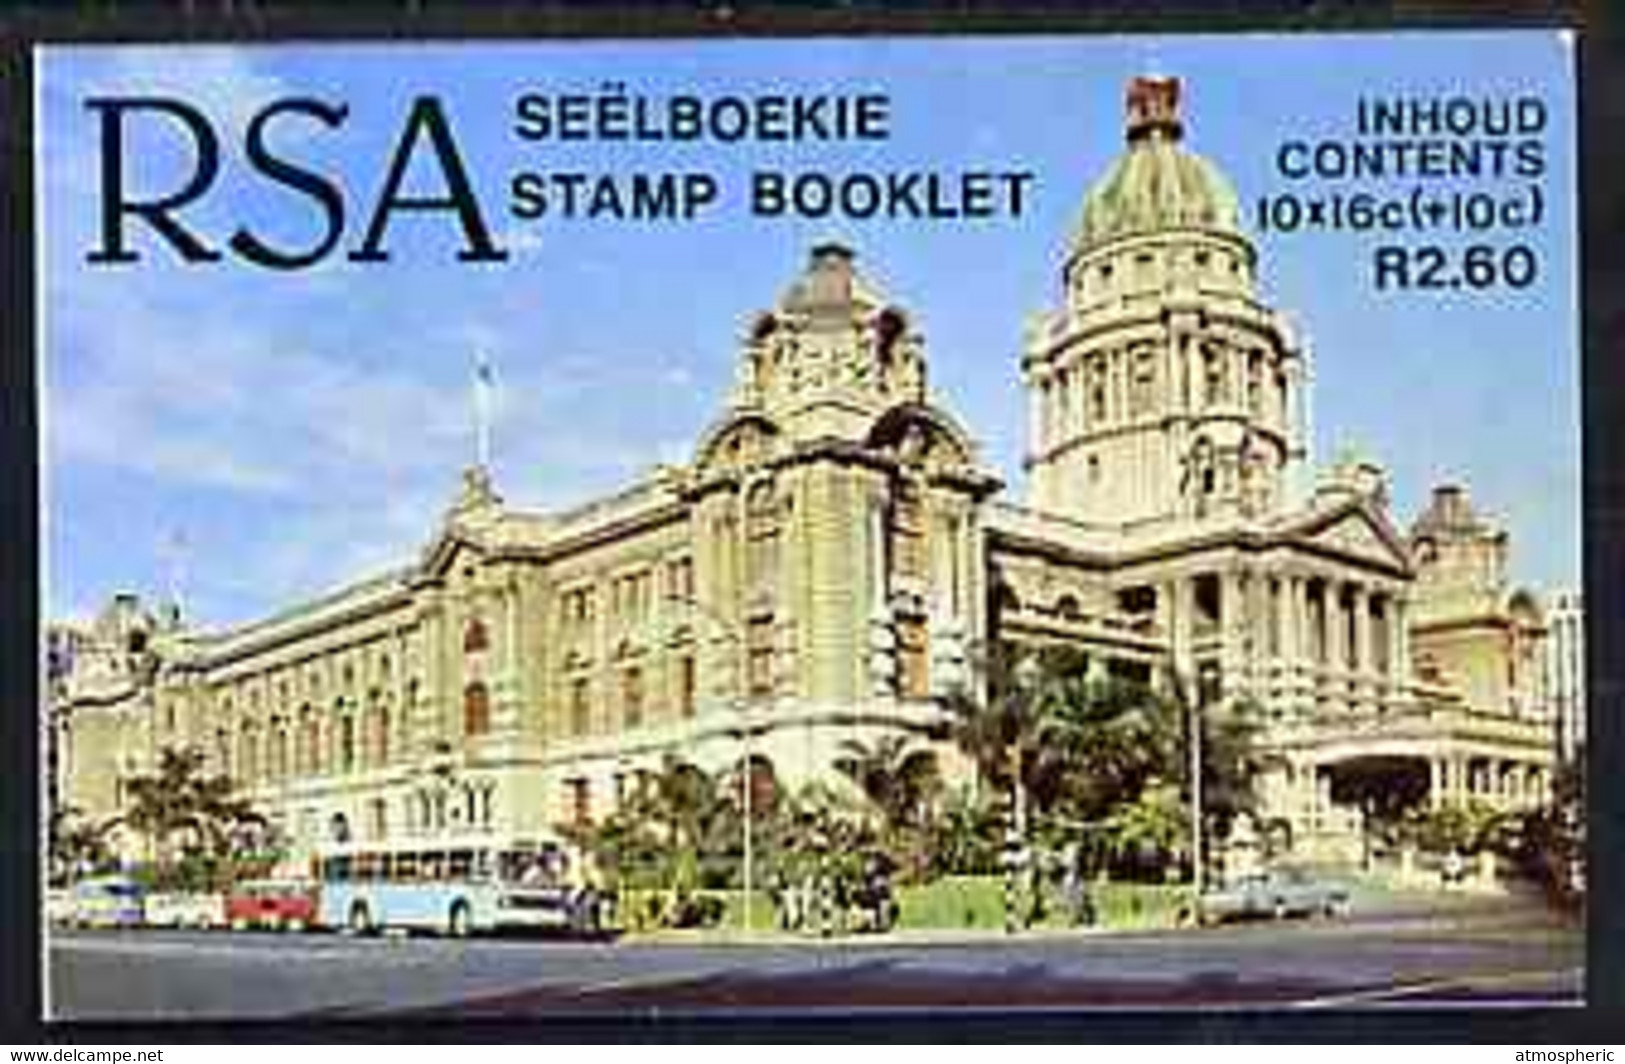 Booklet - South Africa 1987-88 National Flood Relief Fund #1 (City Hall) 2r60 Booklet Complete And Pristine, SG SB20 - Postzegelboekjes